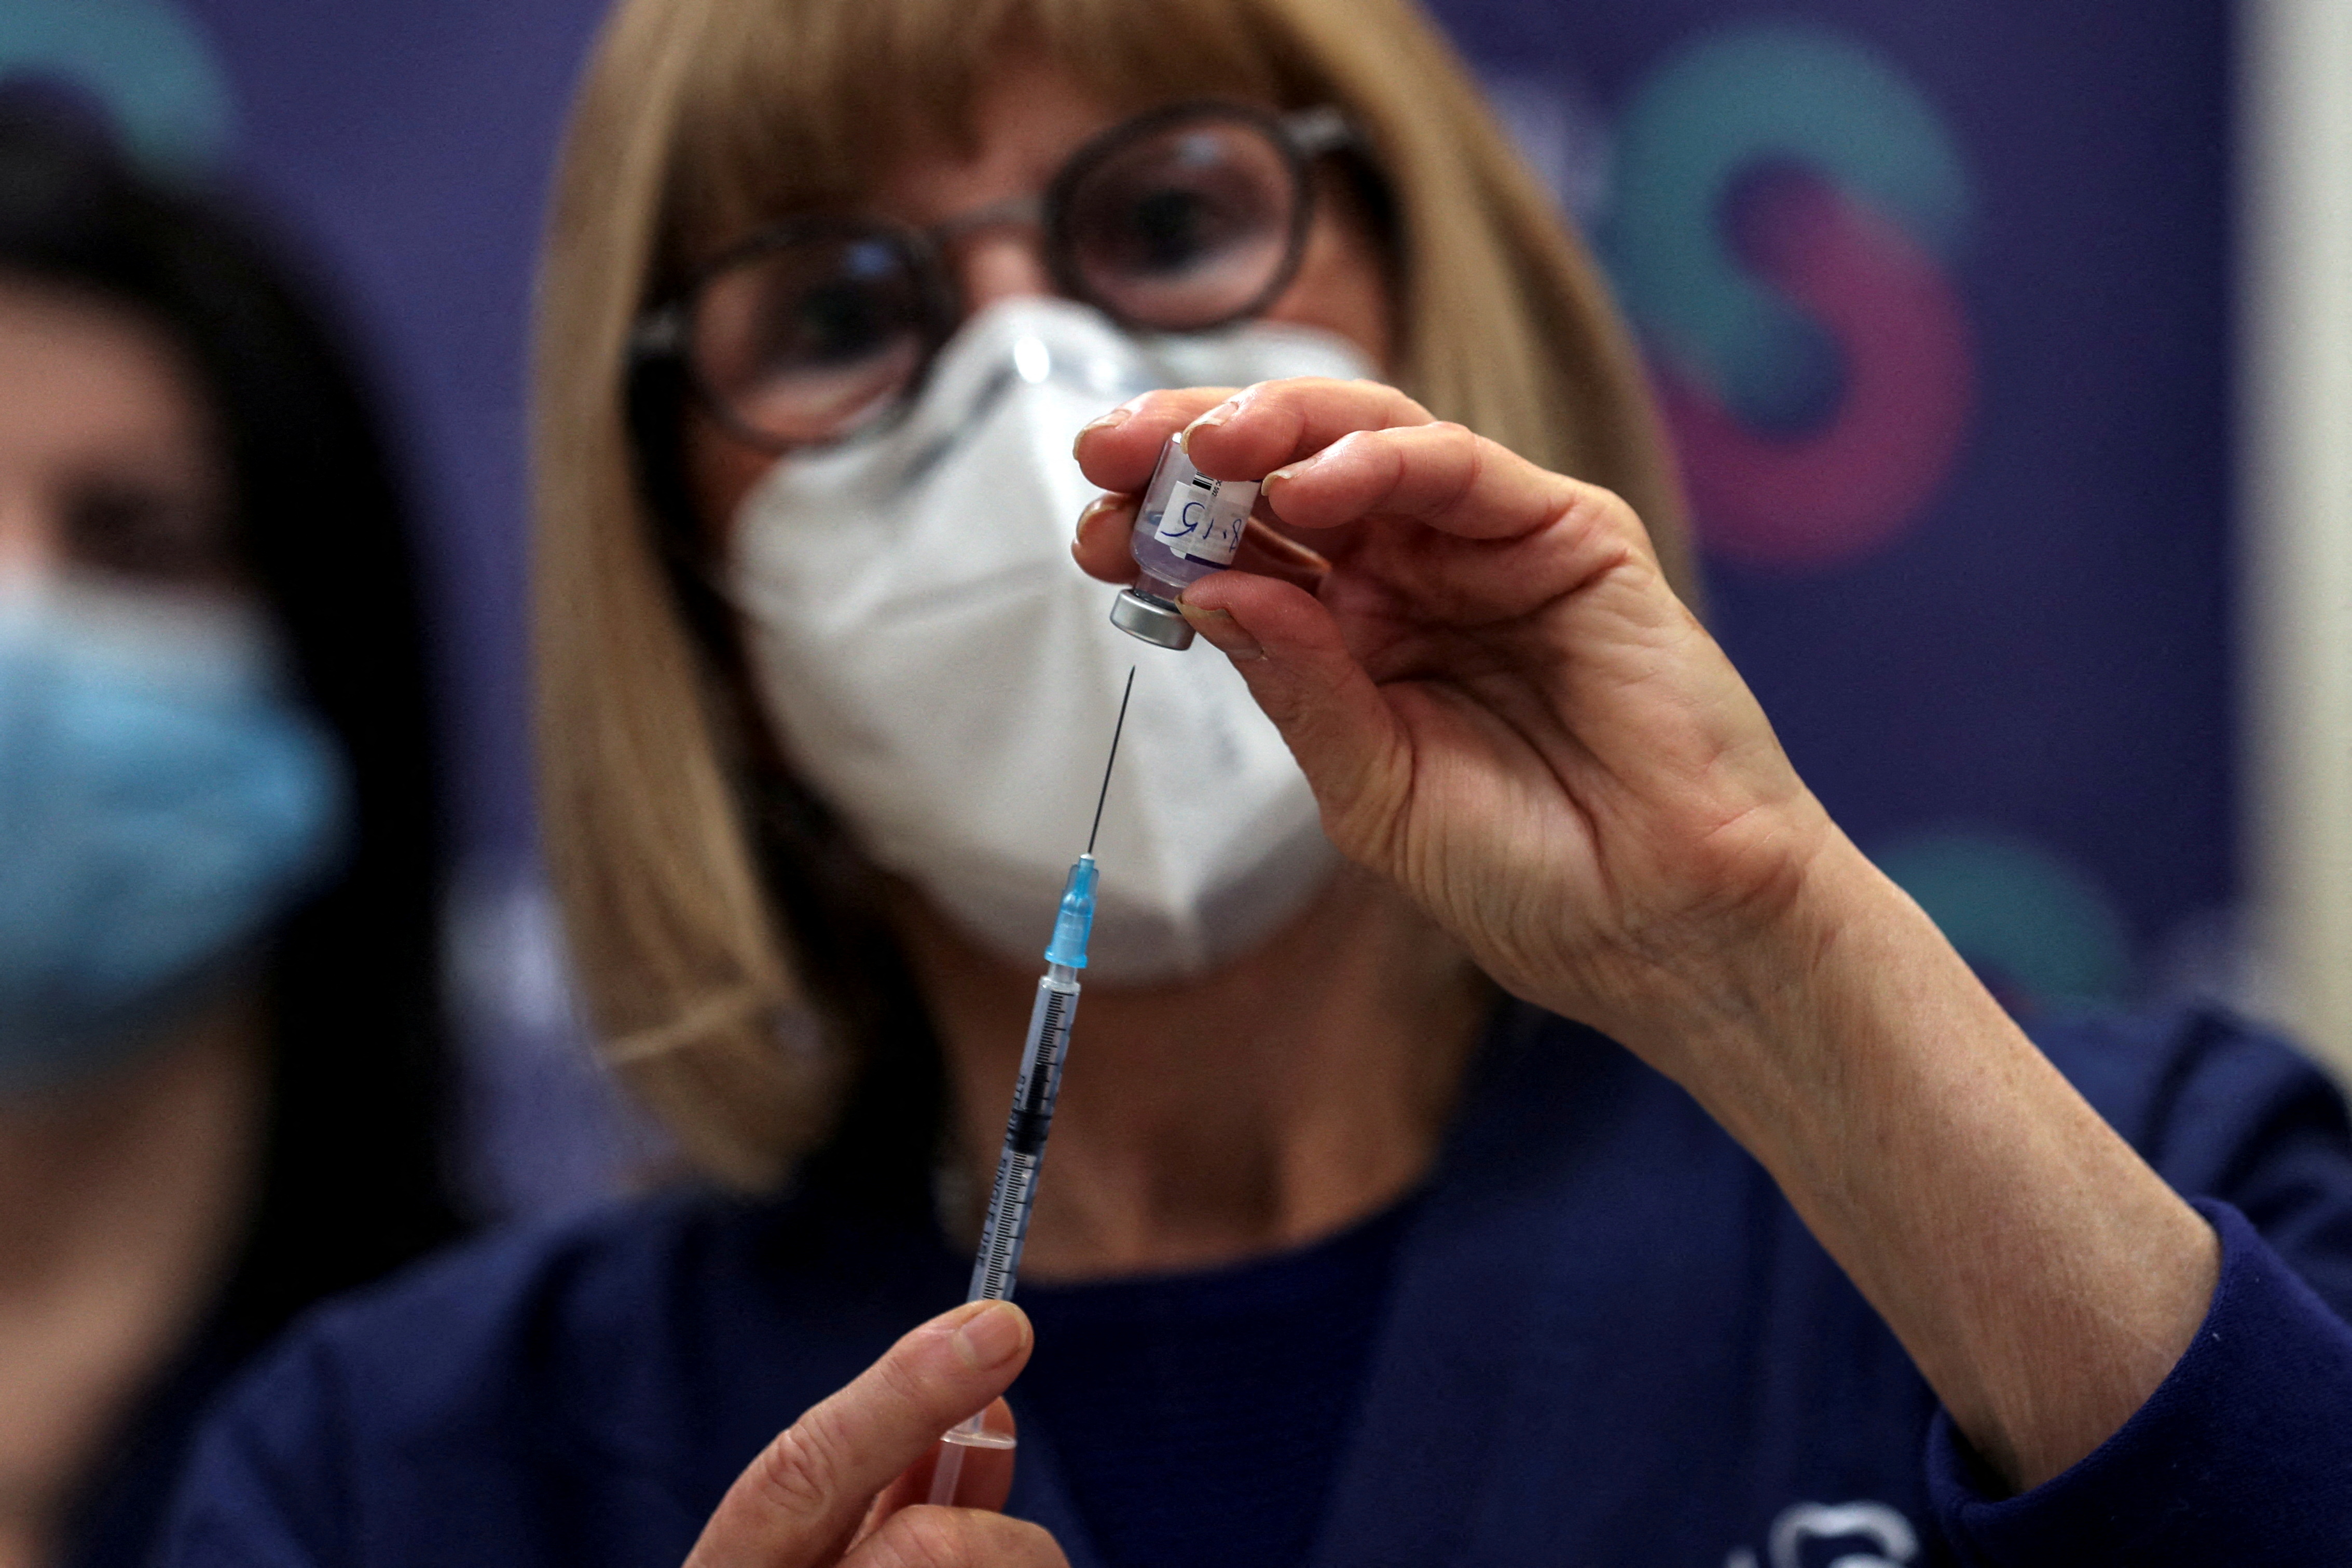 A nurse prepares a fourth dose of coronavirus disease (COVID-19) vaccine as part of a trial in Israel, as Health Ministry is considering offering the second booster to the elderly and immunocompromised, at Sheba Medical Center in Ramat Gan